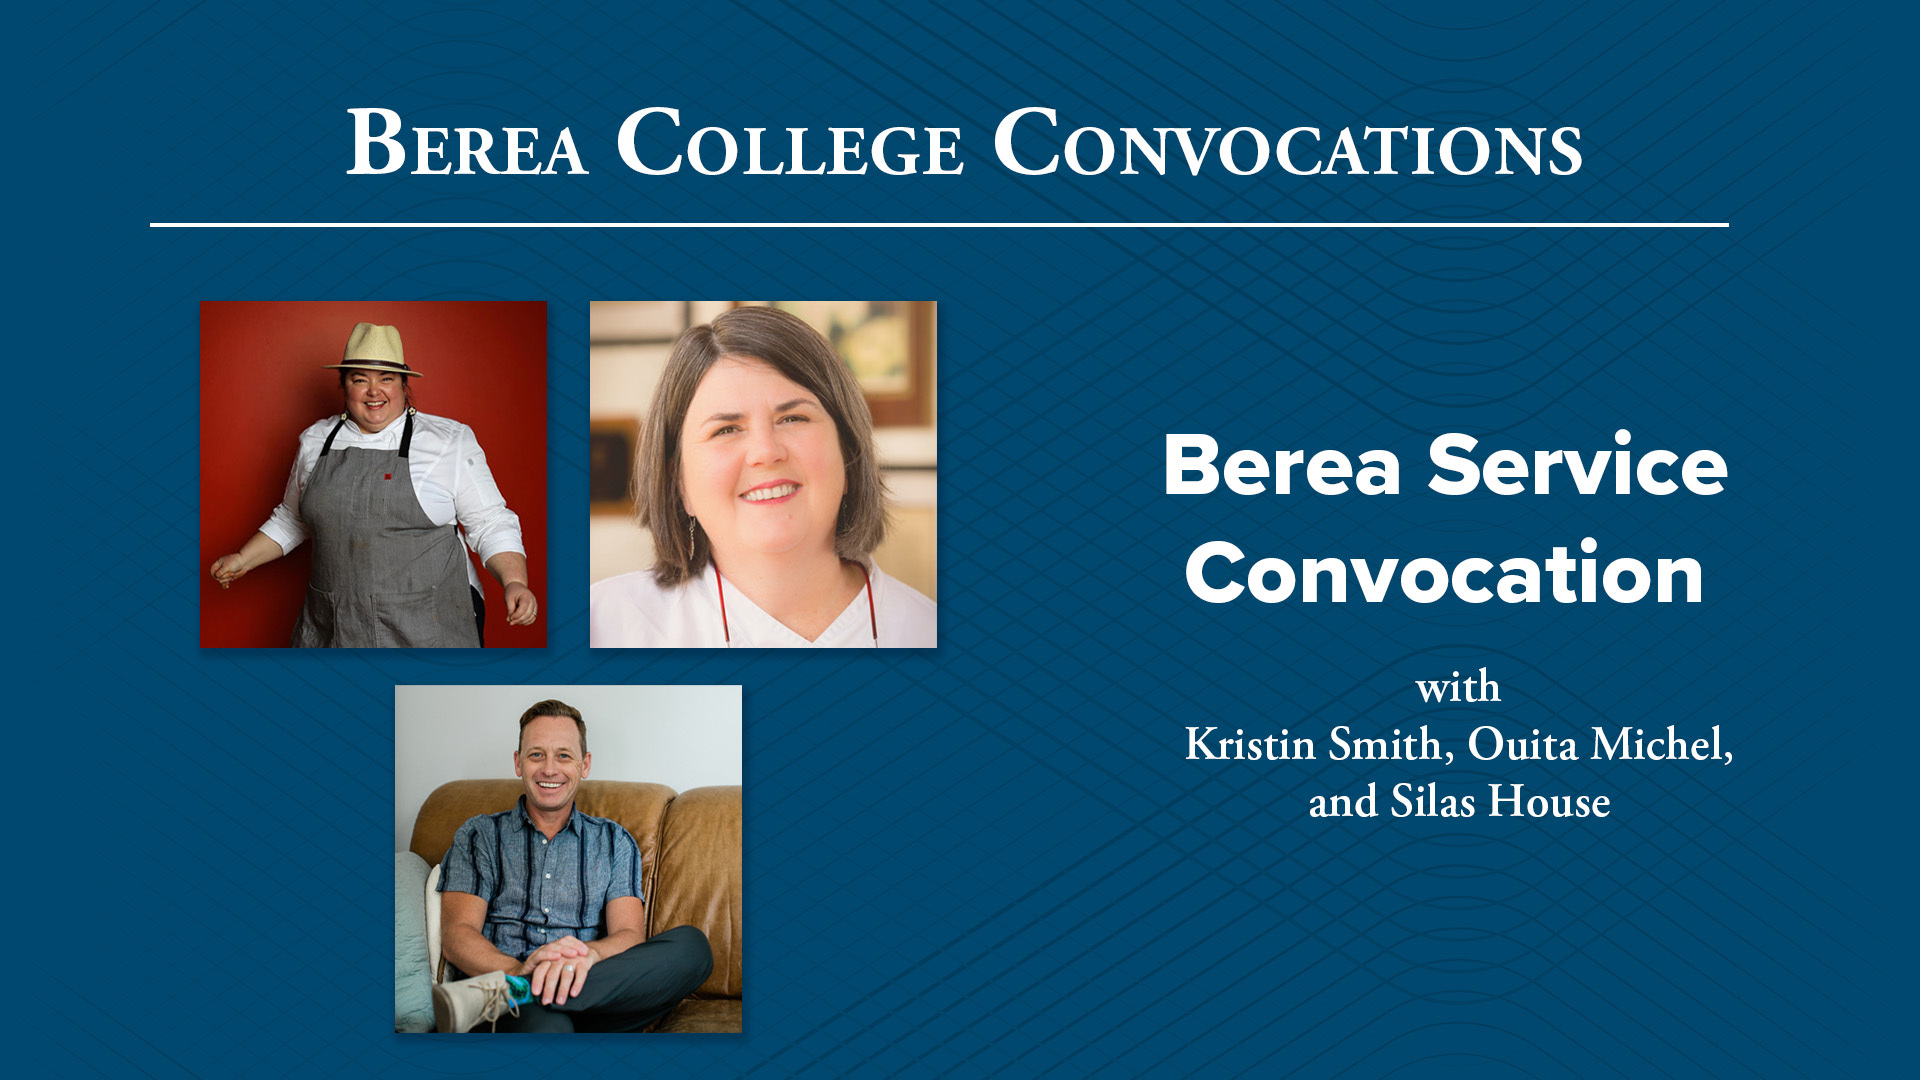 Berea College convocation featuring Ouita Michel, Kristin Smith and Silas House